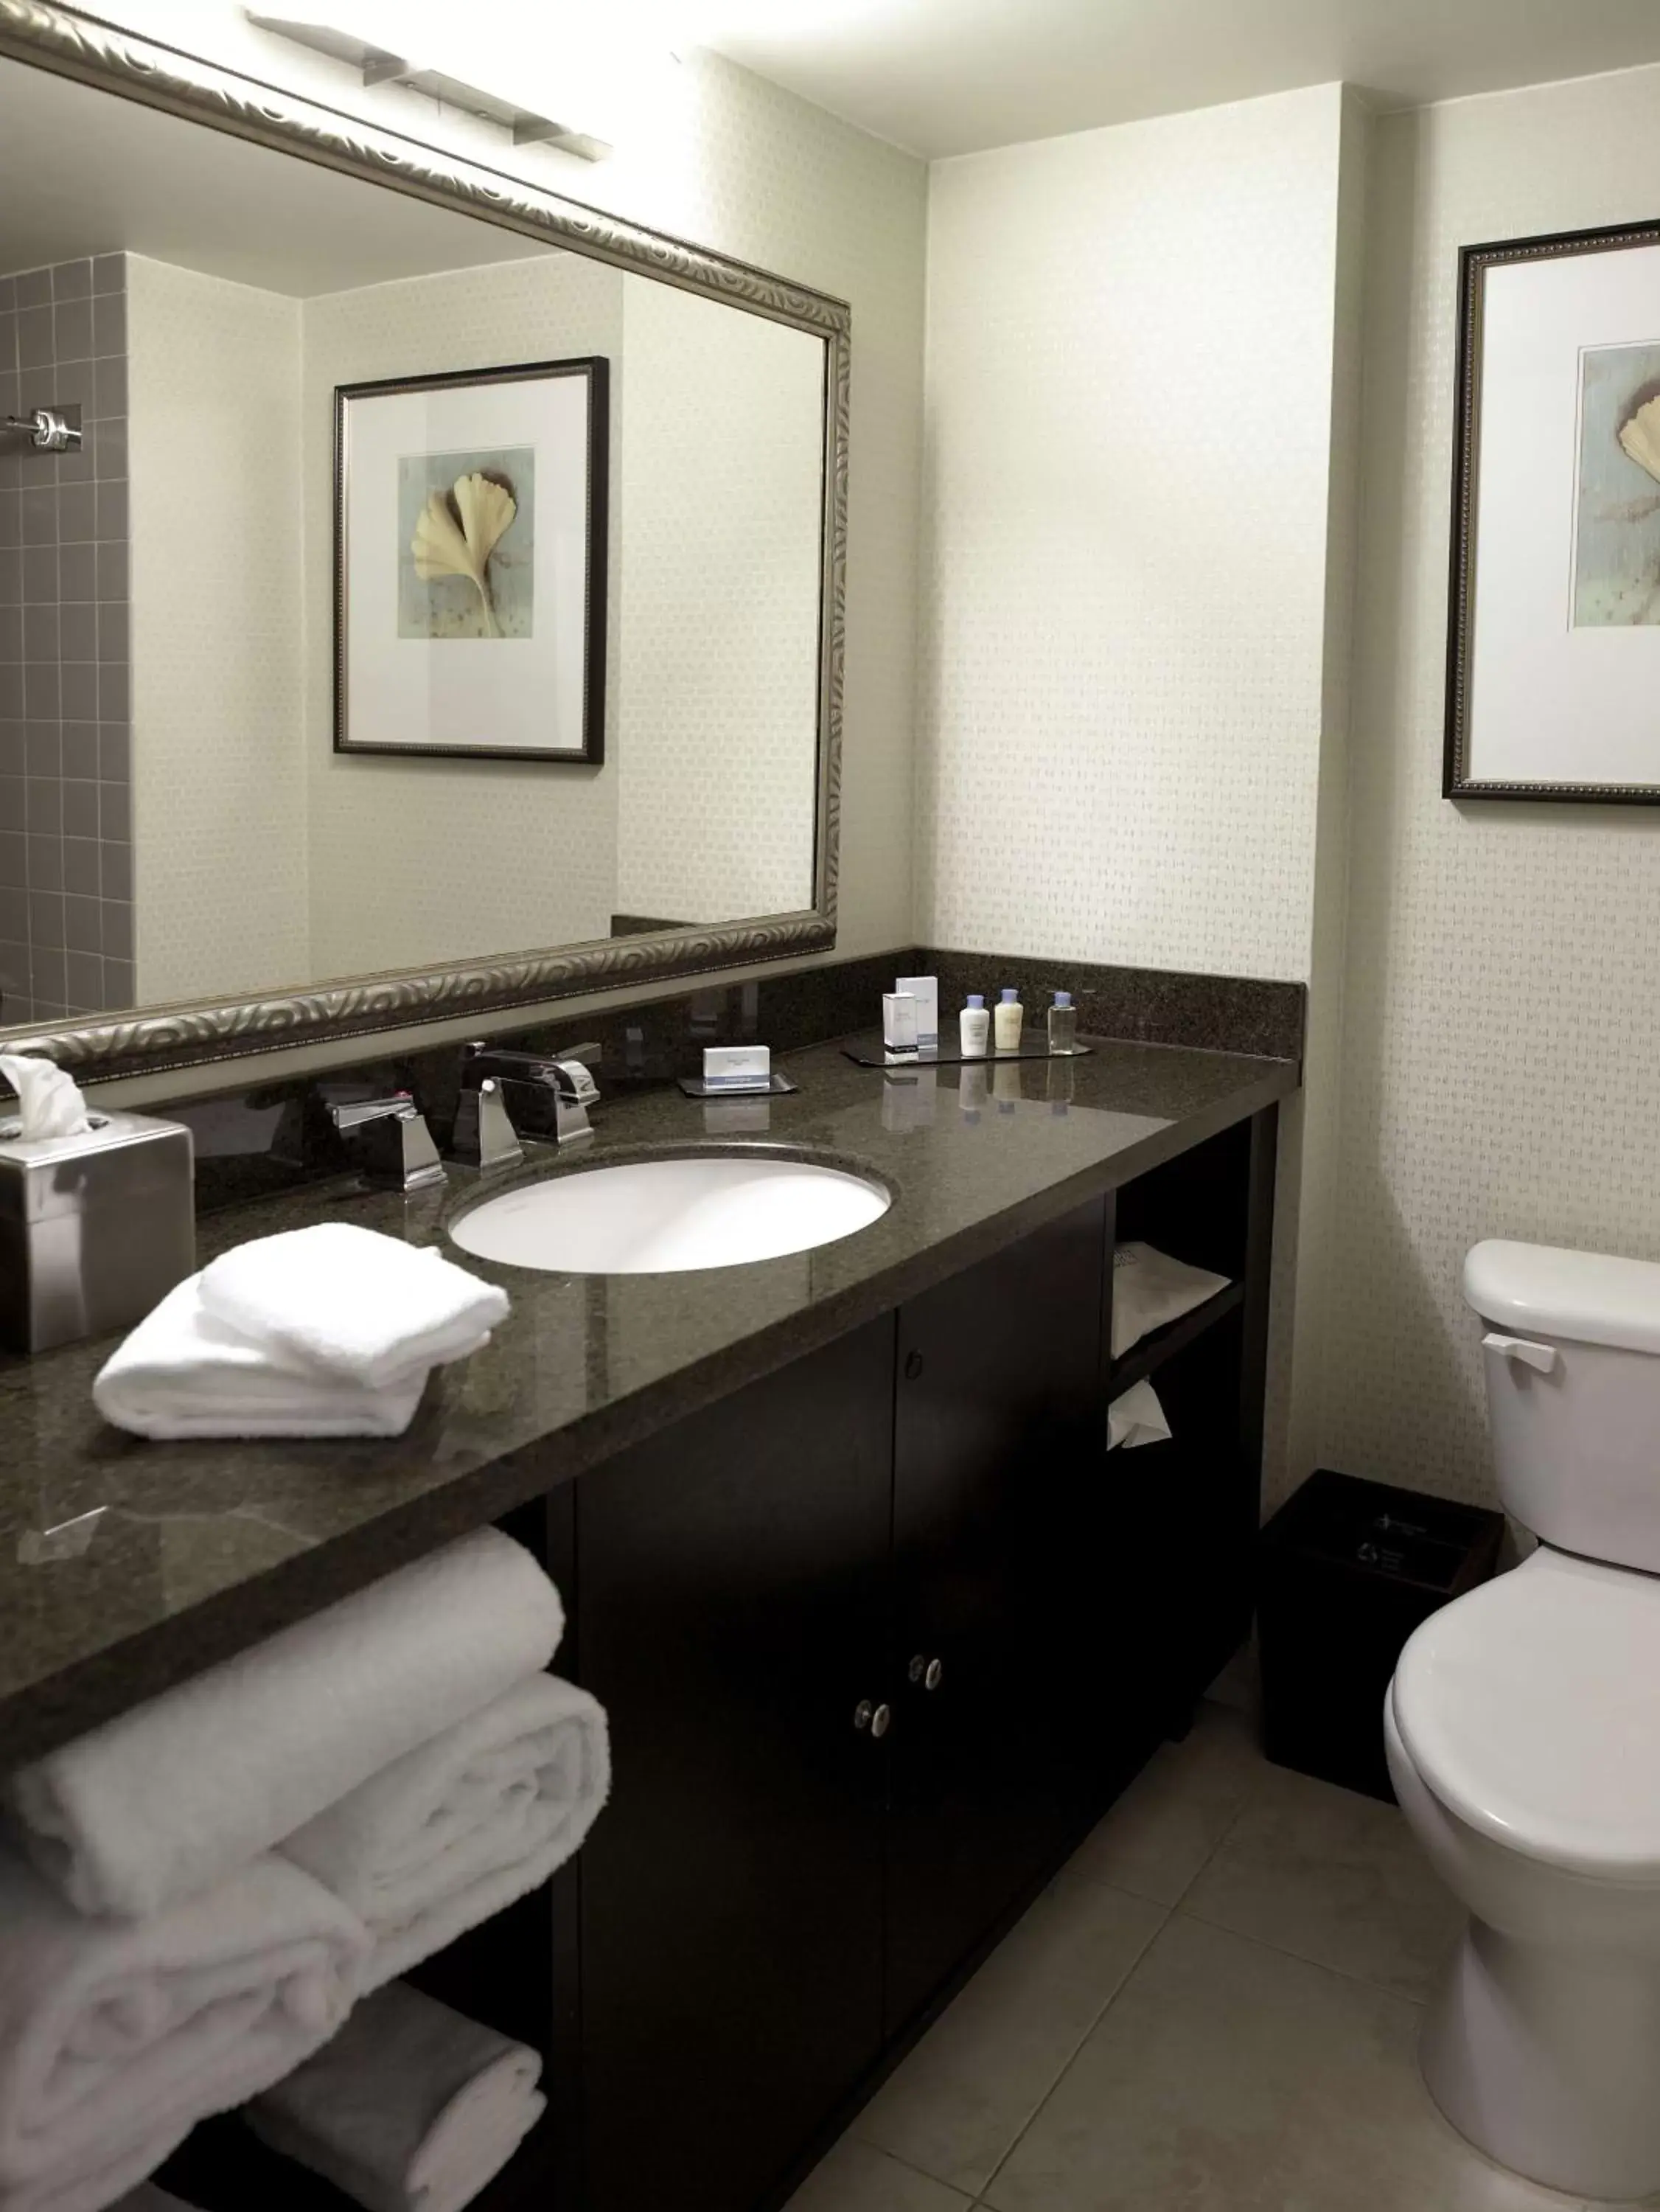 Bathroom in DoubleTree by Hilton Charlotte Airport